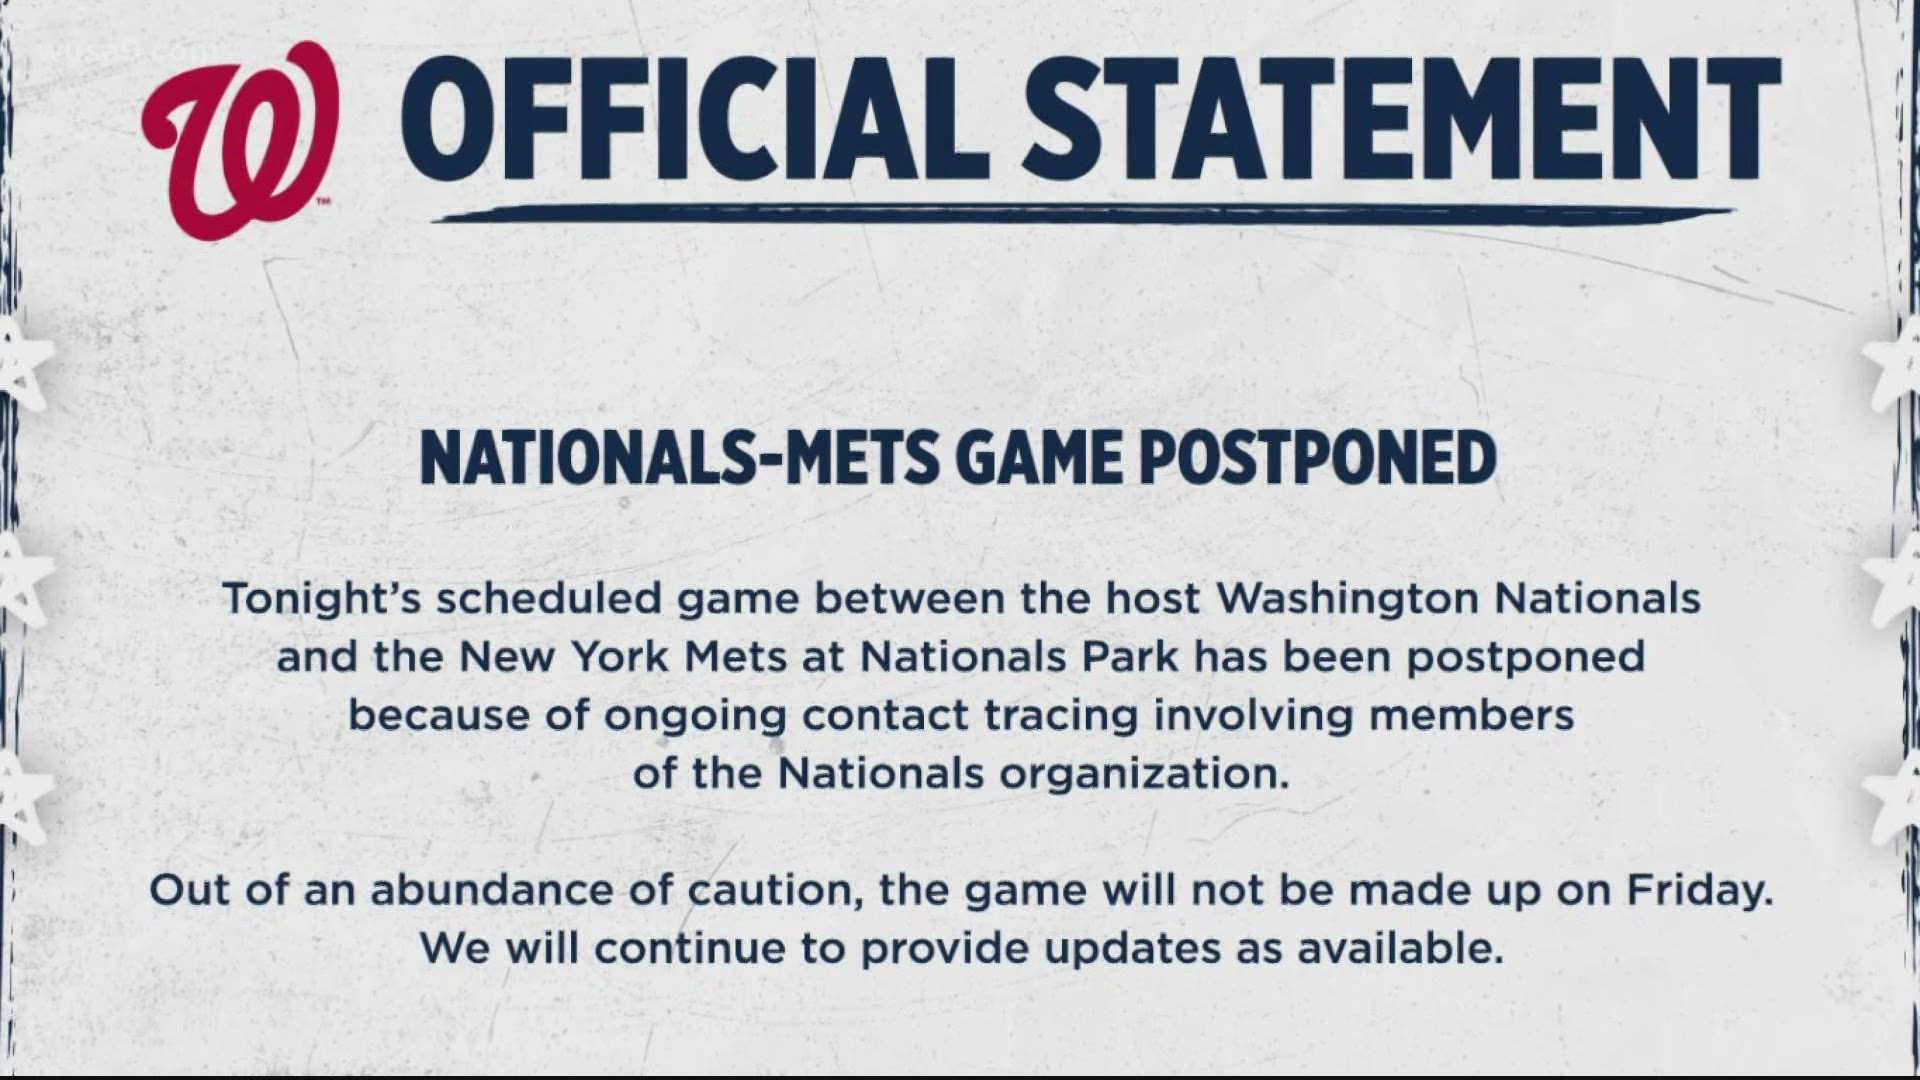 A player for the Washington Nationals tested positive for COVID-19, and four teammates and a staff member were quarantined.